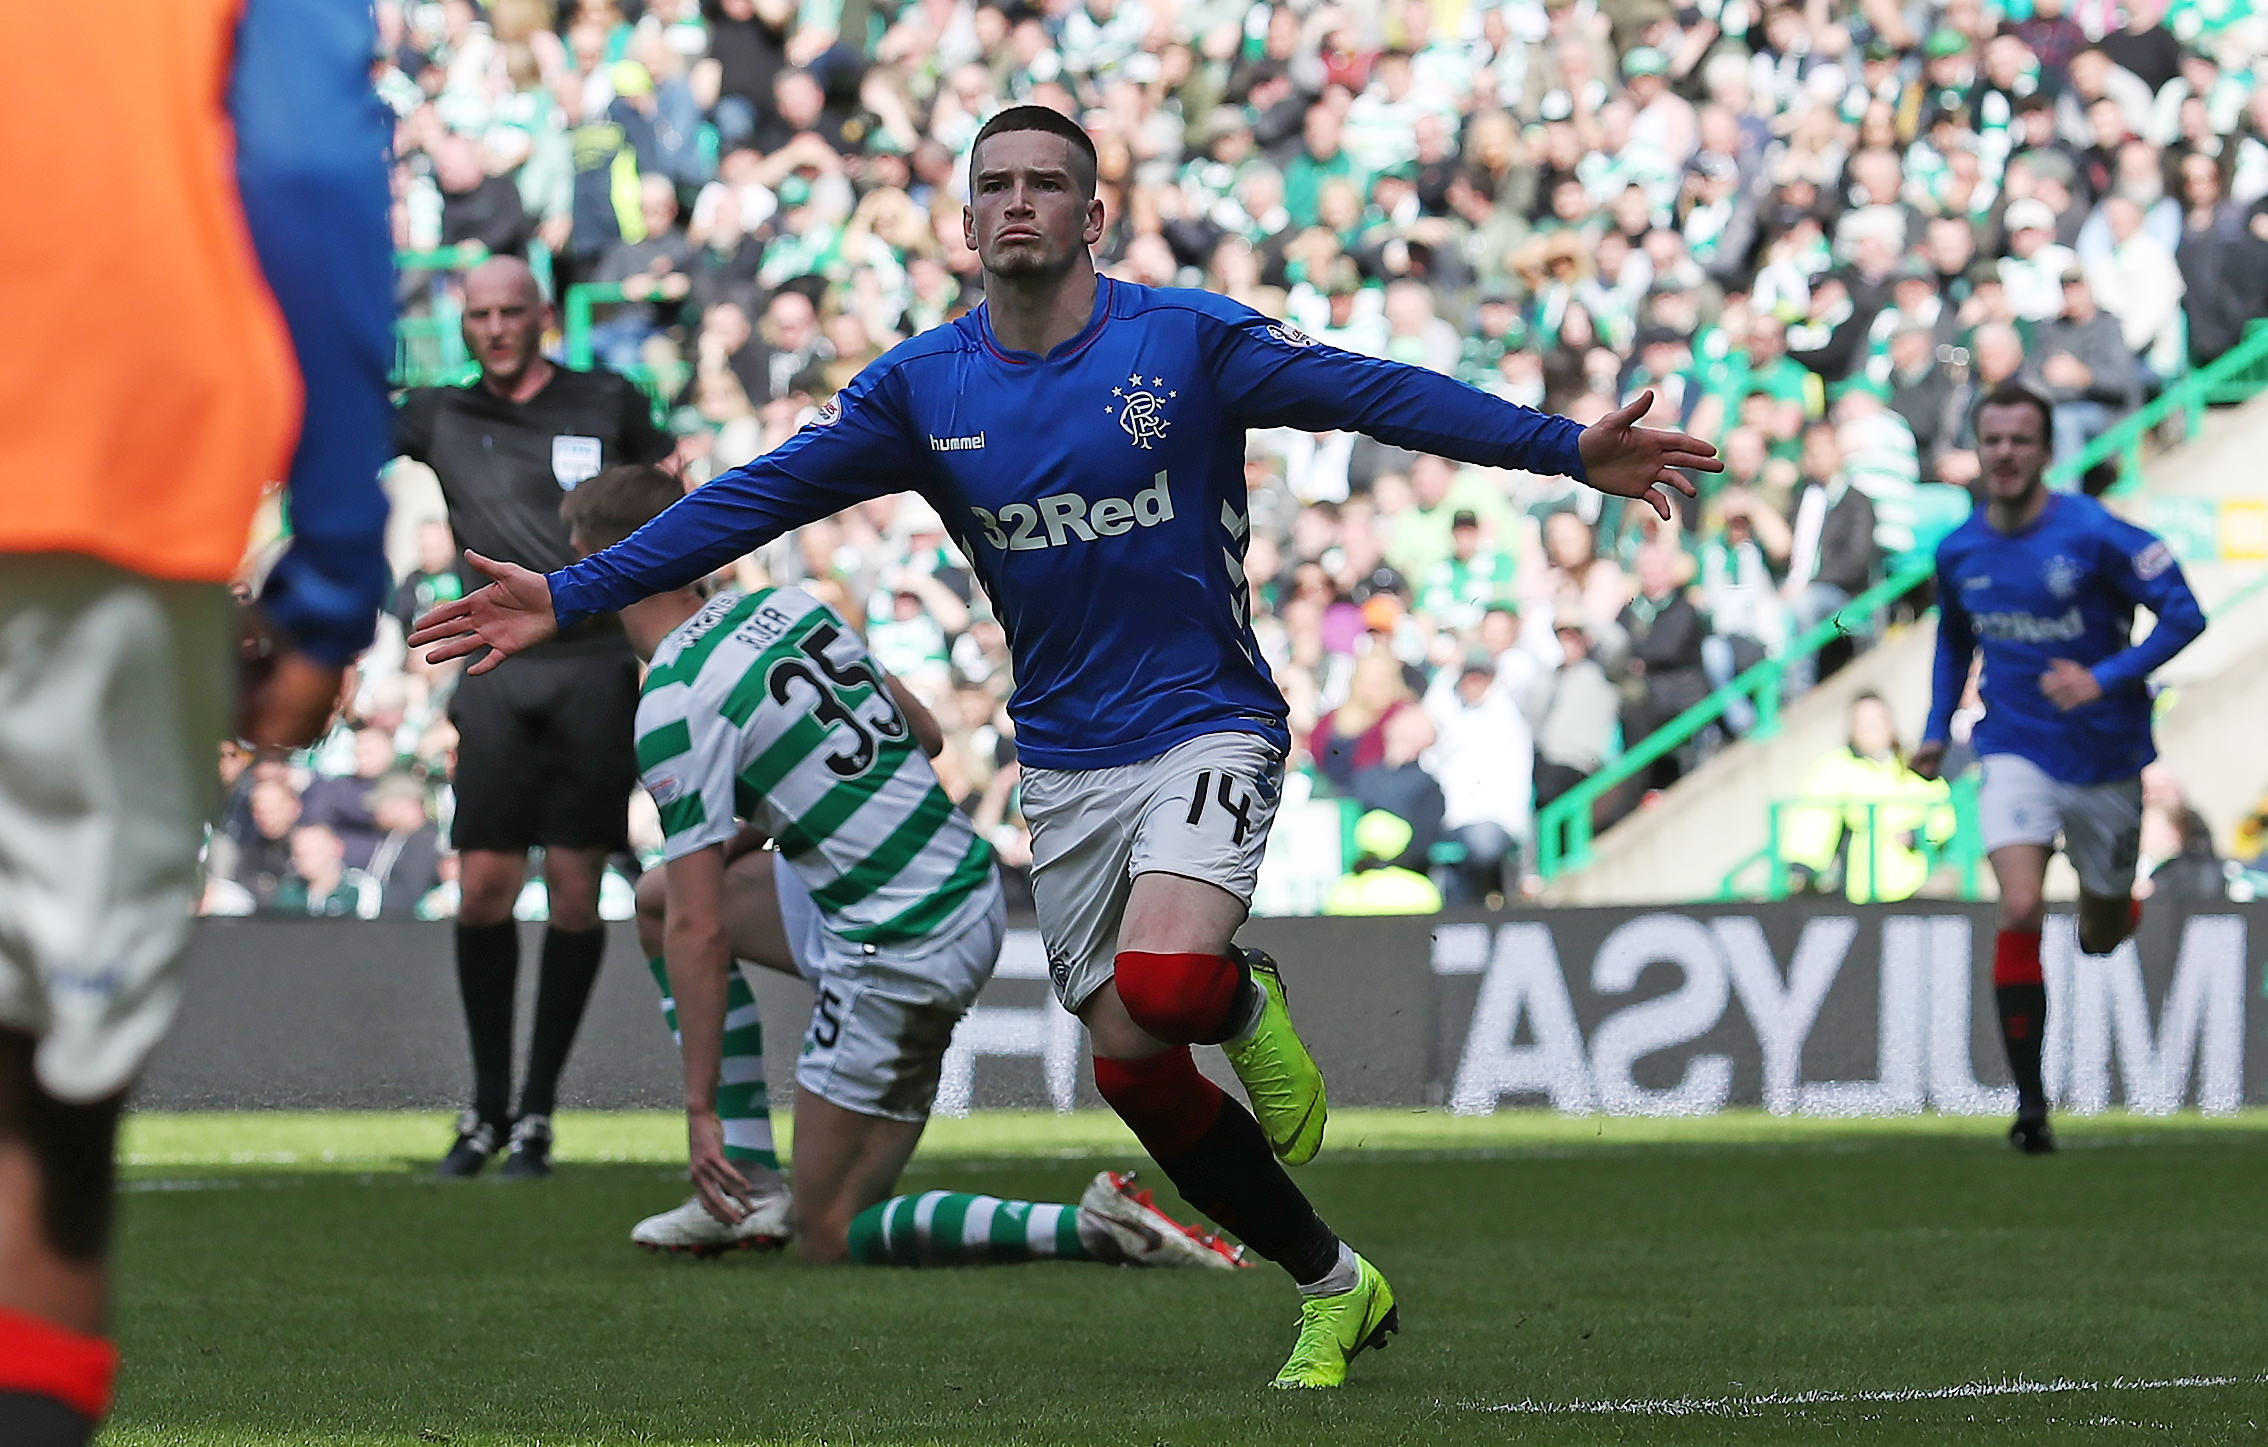 GLASGOW, SCOTLAND - MARCH 31: Ryan Kent of Rangers celebrates after he scores during The Ladbrokes Scottish Premier League match between Celtic and Rangers at Celtic Park on March 31, 2019 in Glasgow, Scotland. (Photo by Ian MacNicol/Getty Images